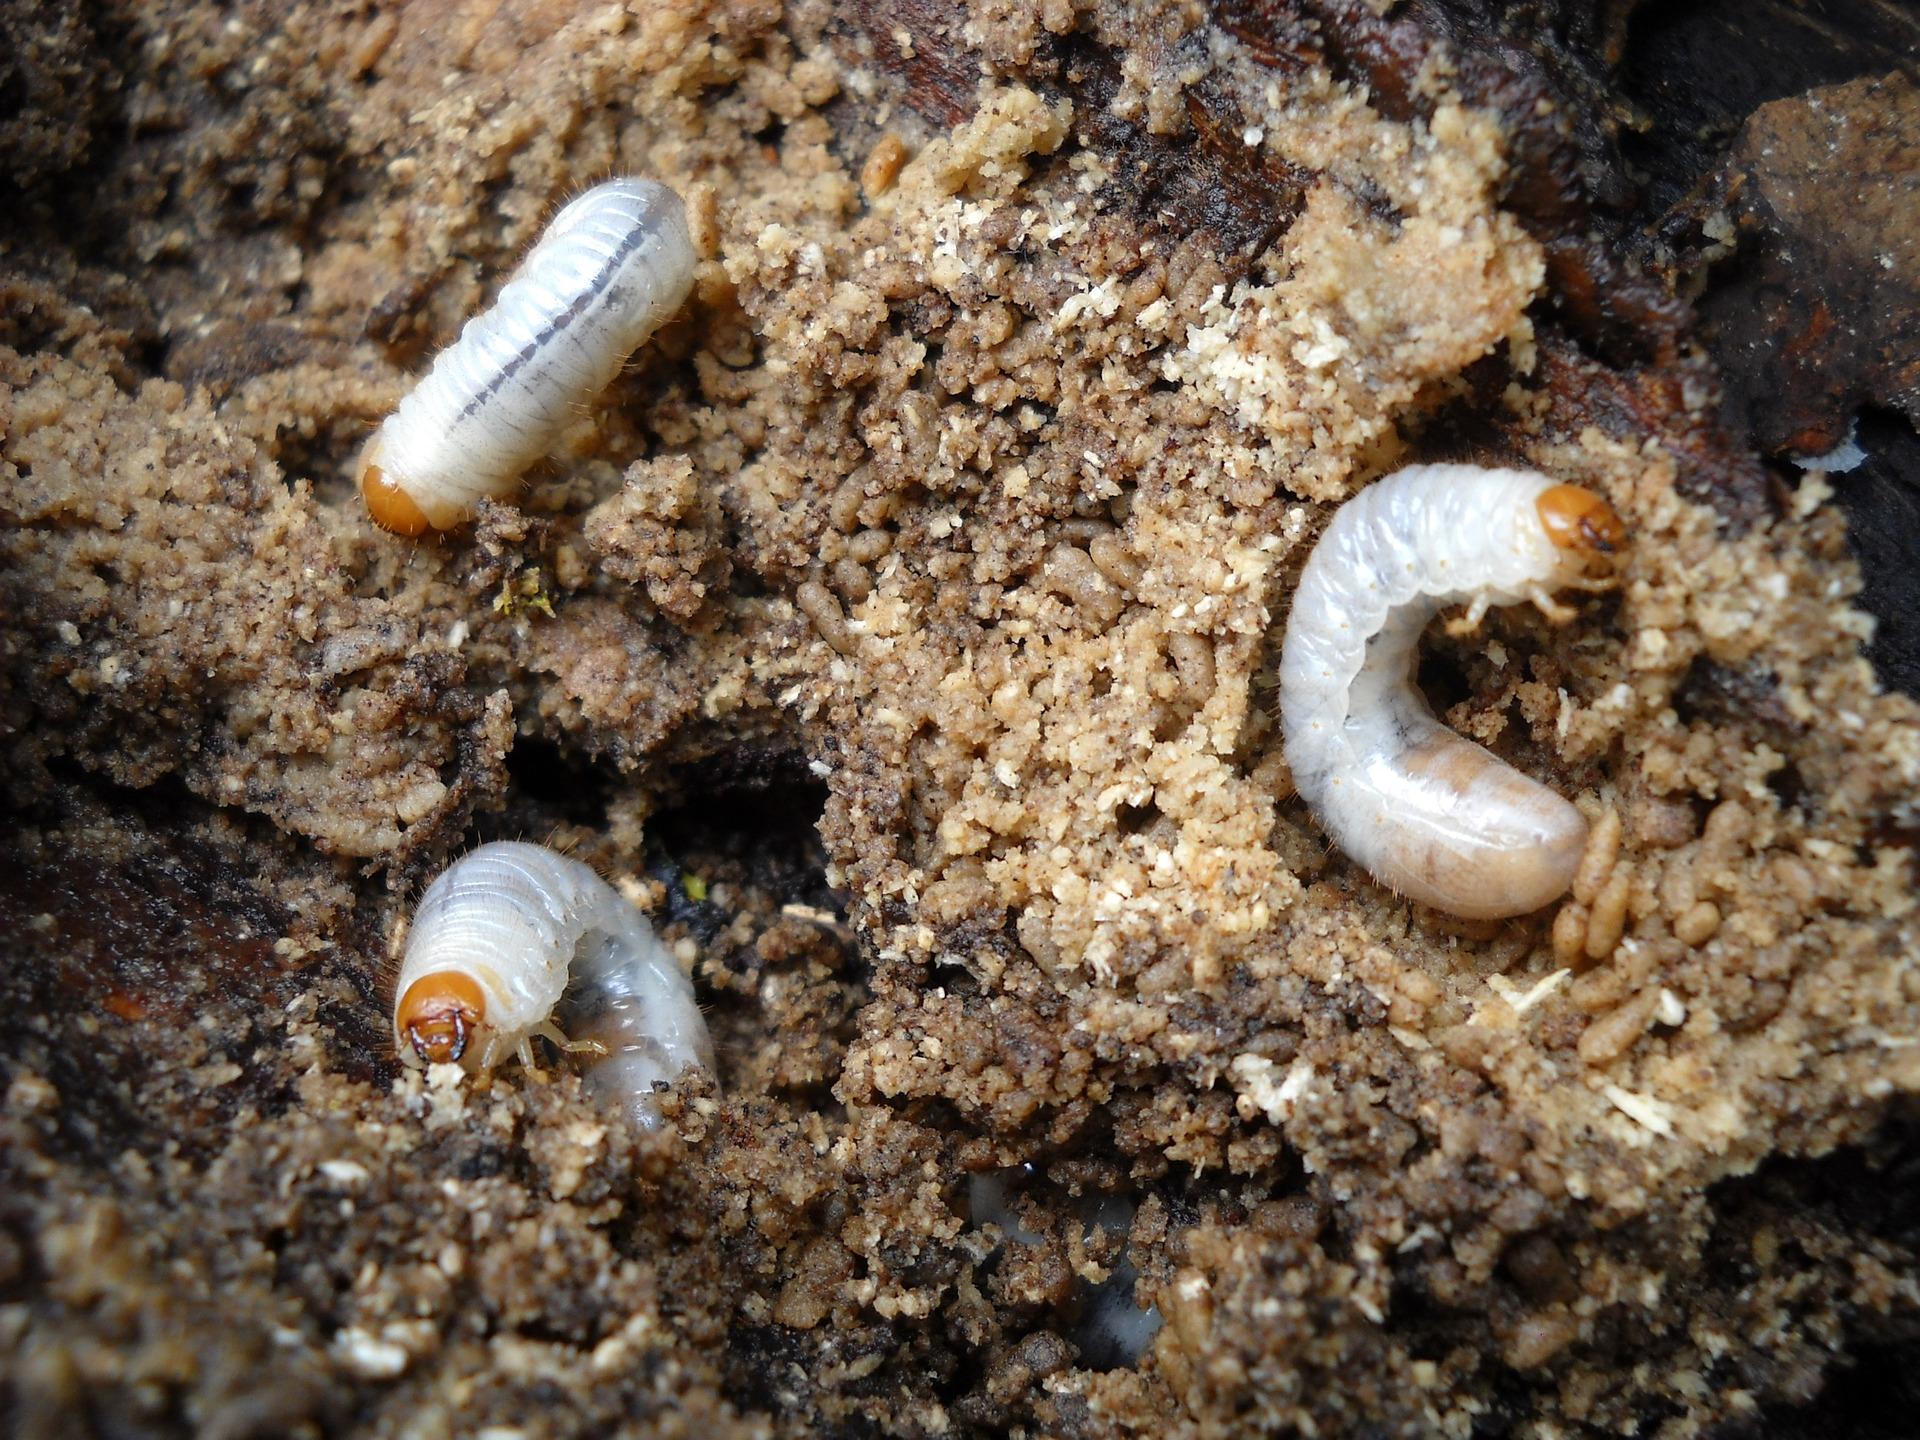 Maggots could be an interesting link between foods and the waste they  produce